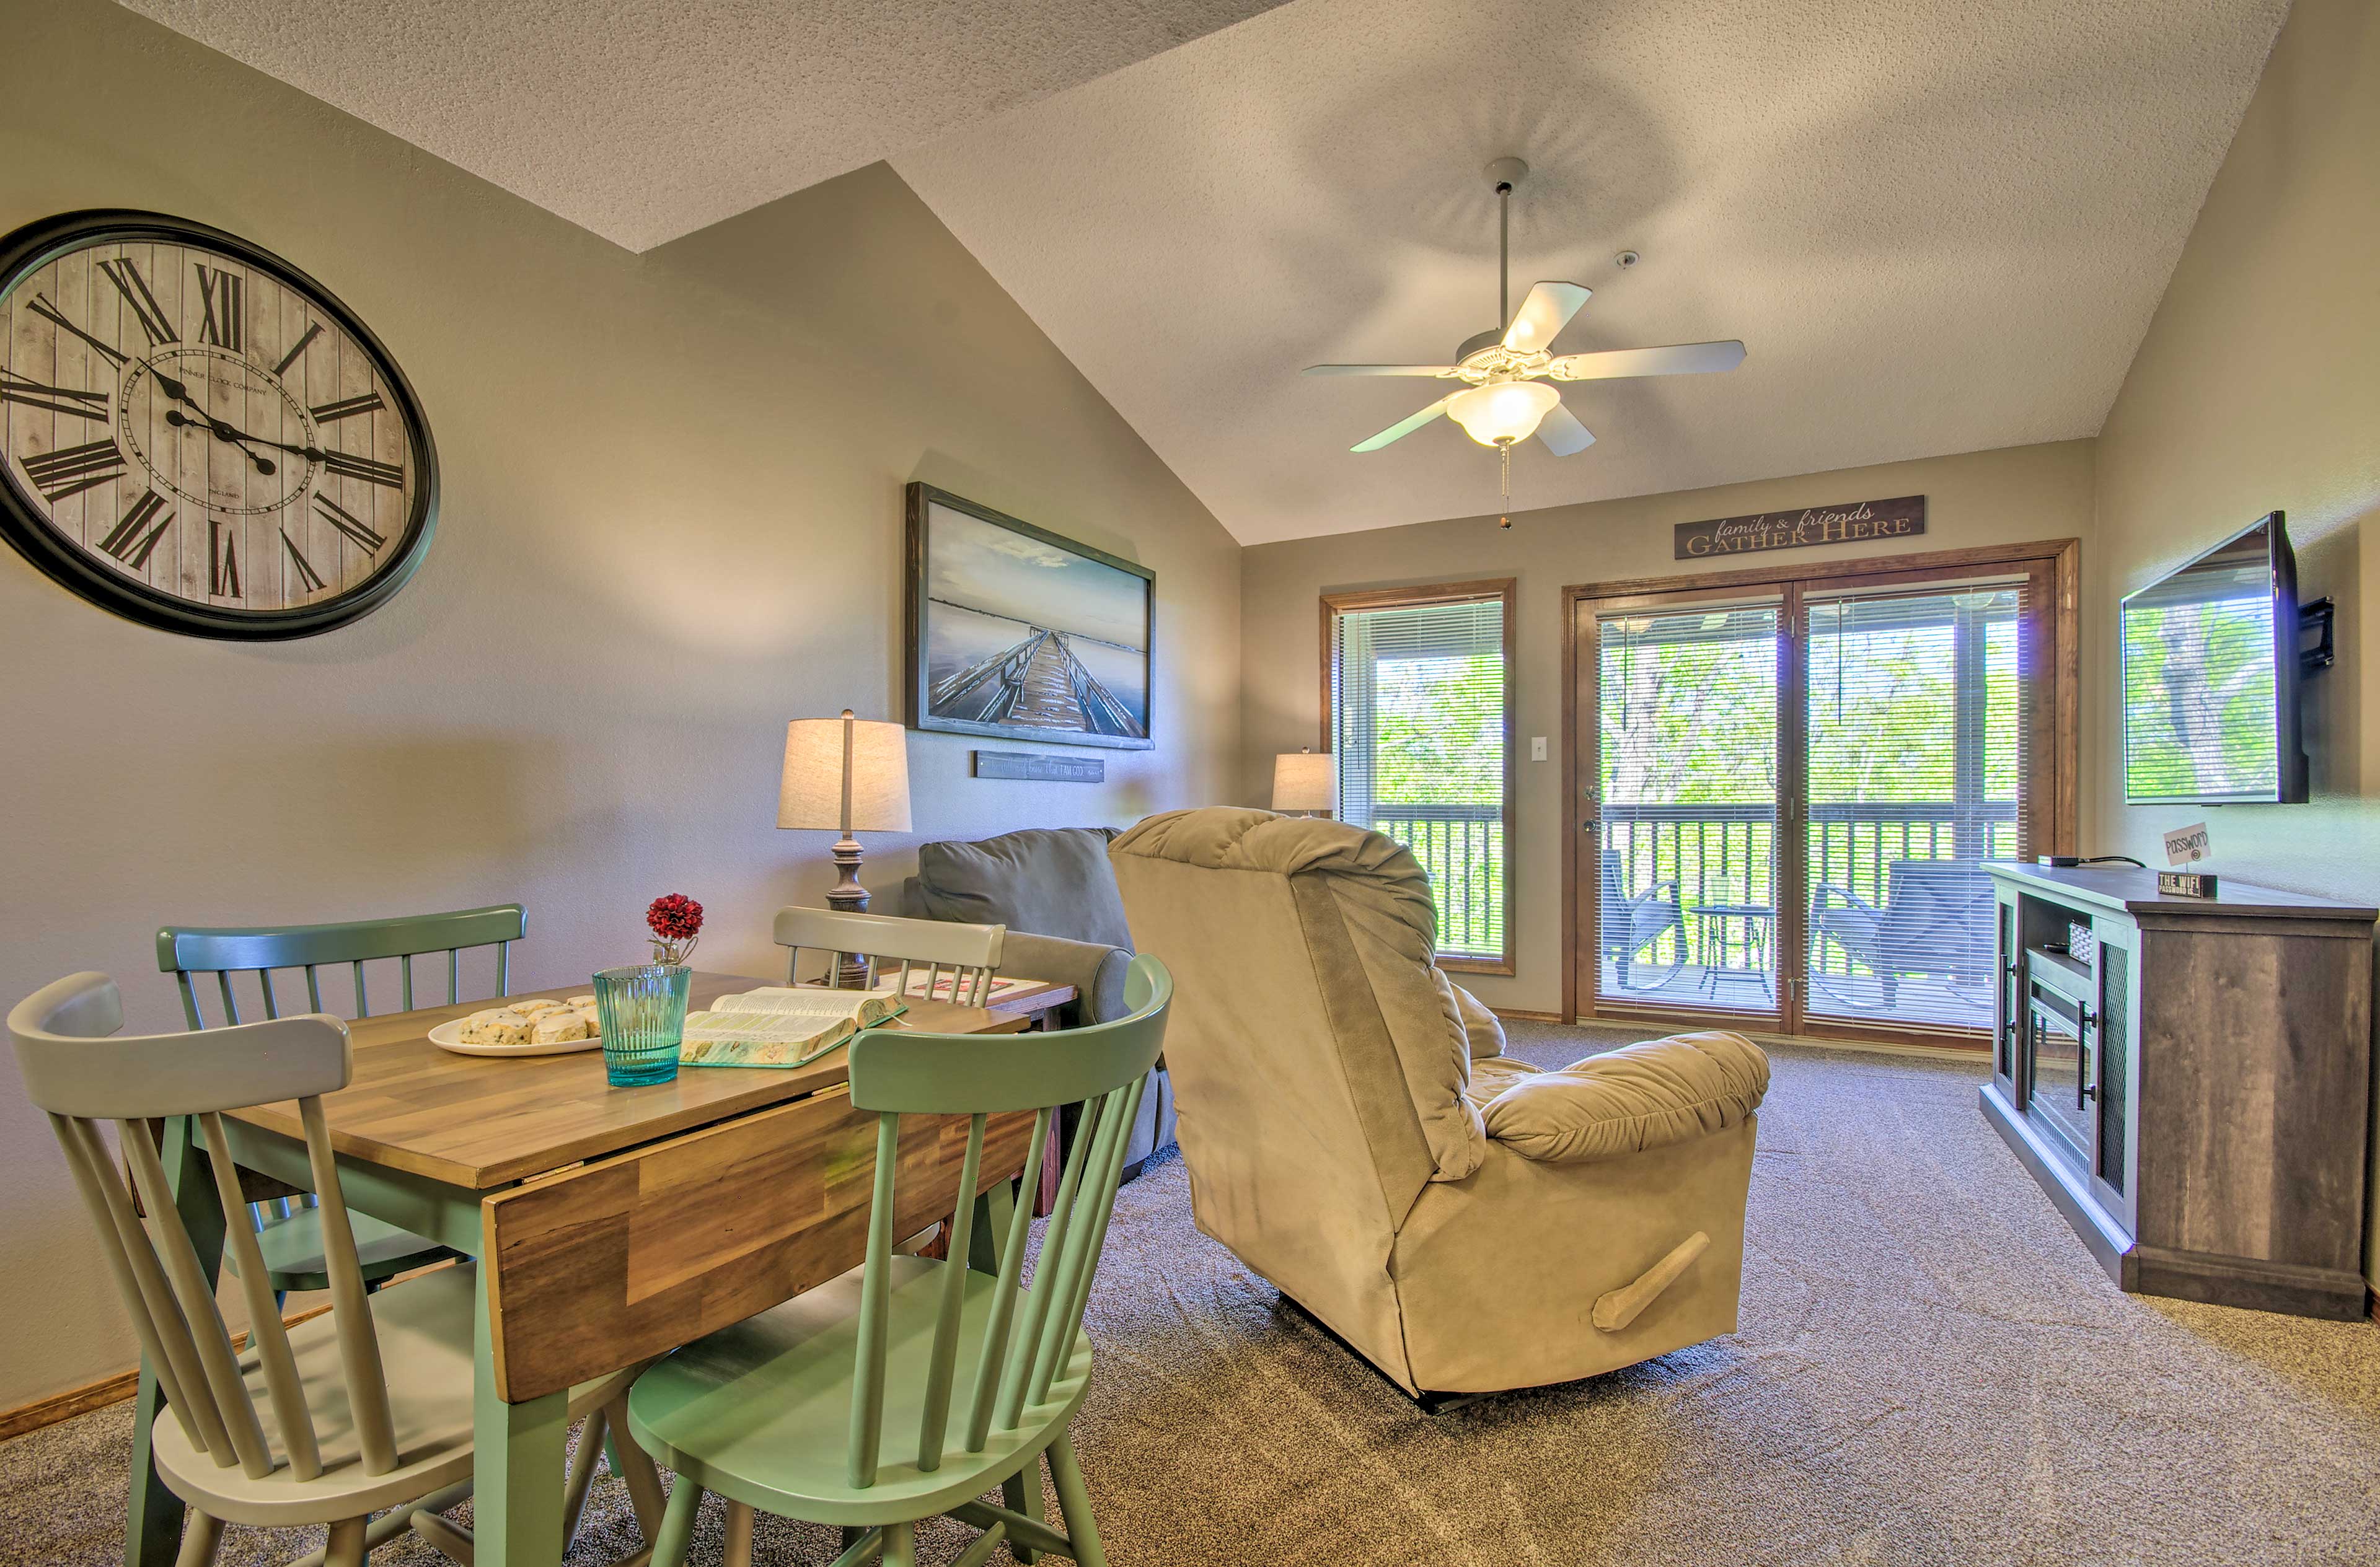 End the day with  dinner at the dining table at this Branson West condo!